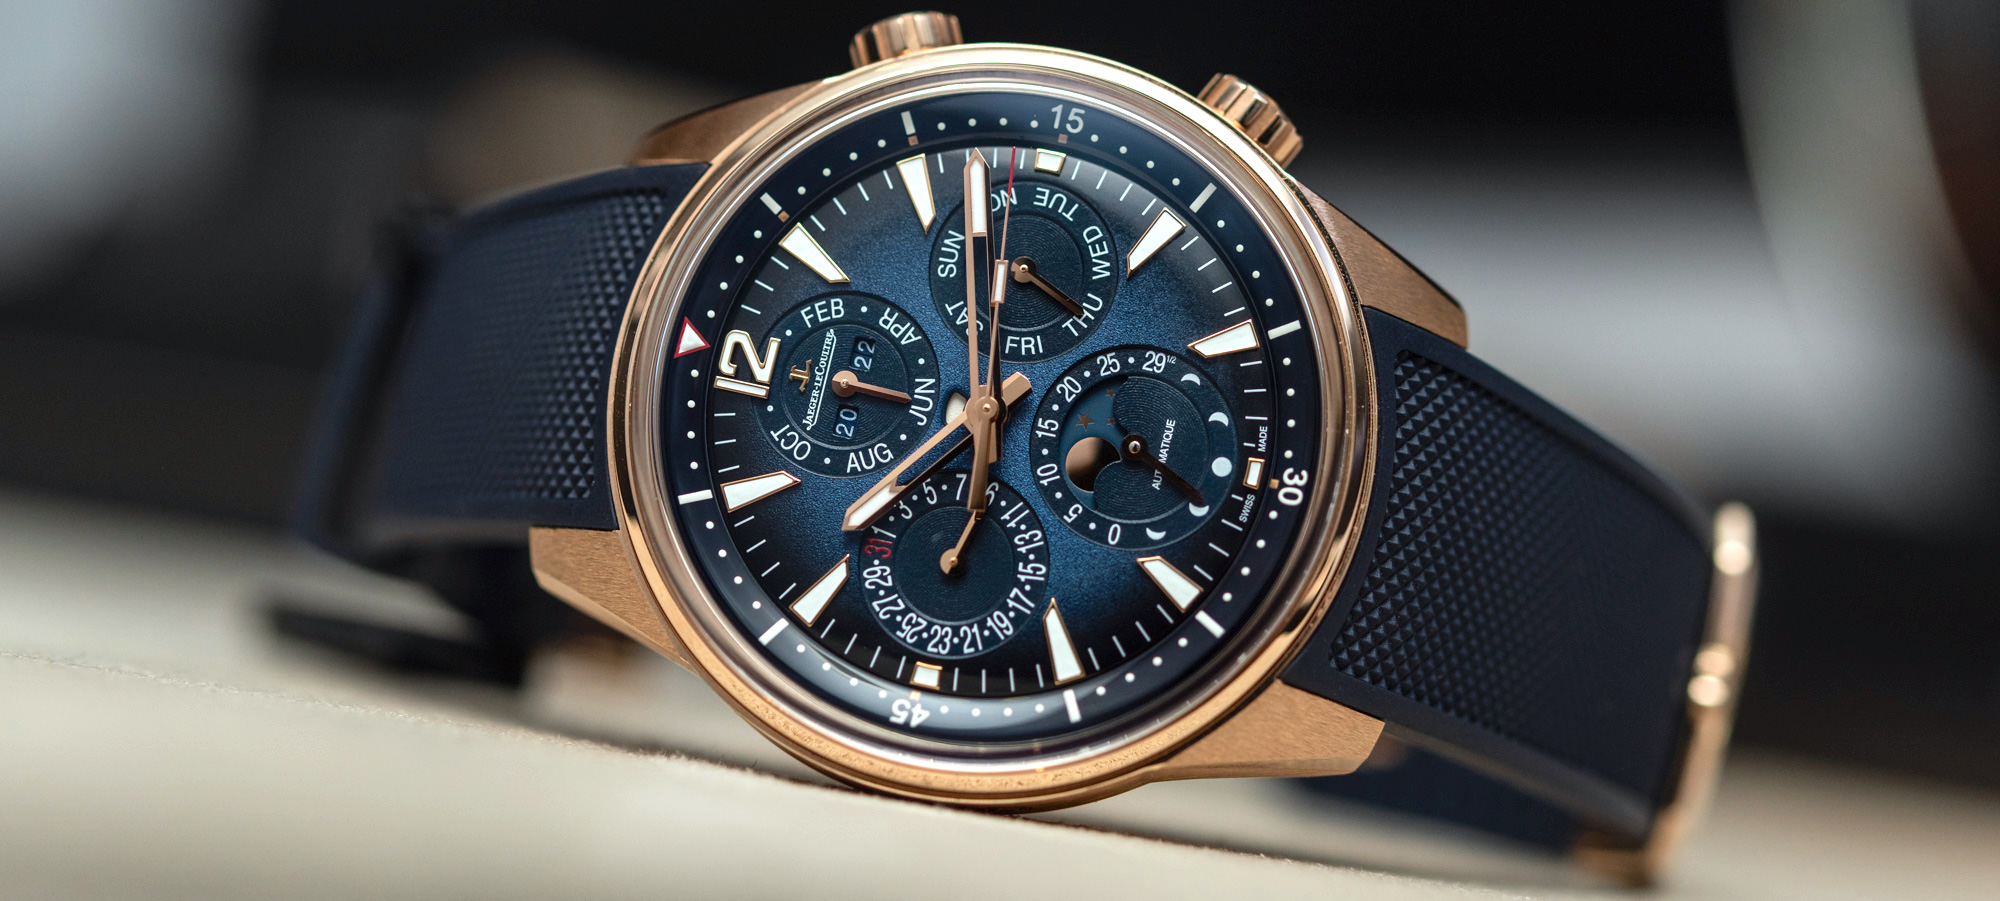 Watches Wonders 2022: Jaeger-LeCoultre Polaris Perpetual, 51% OFF